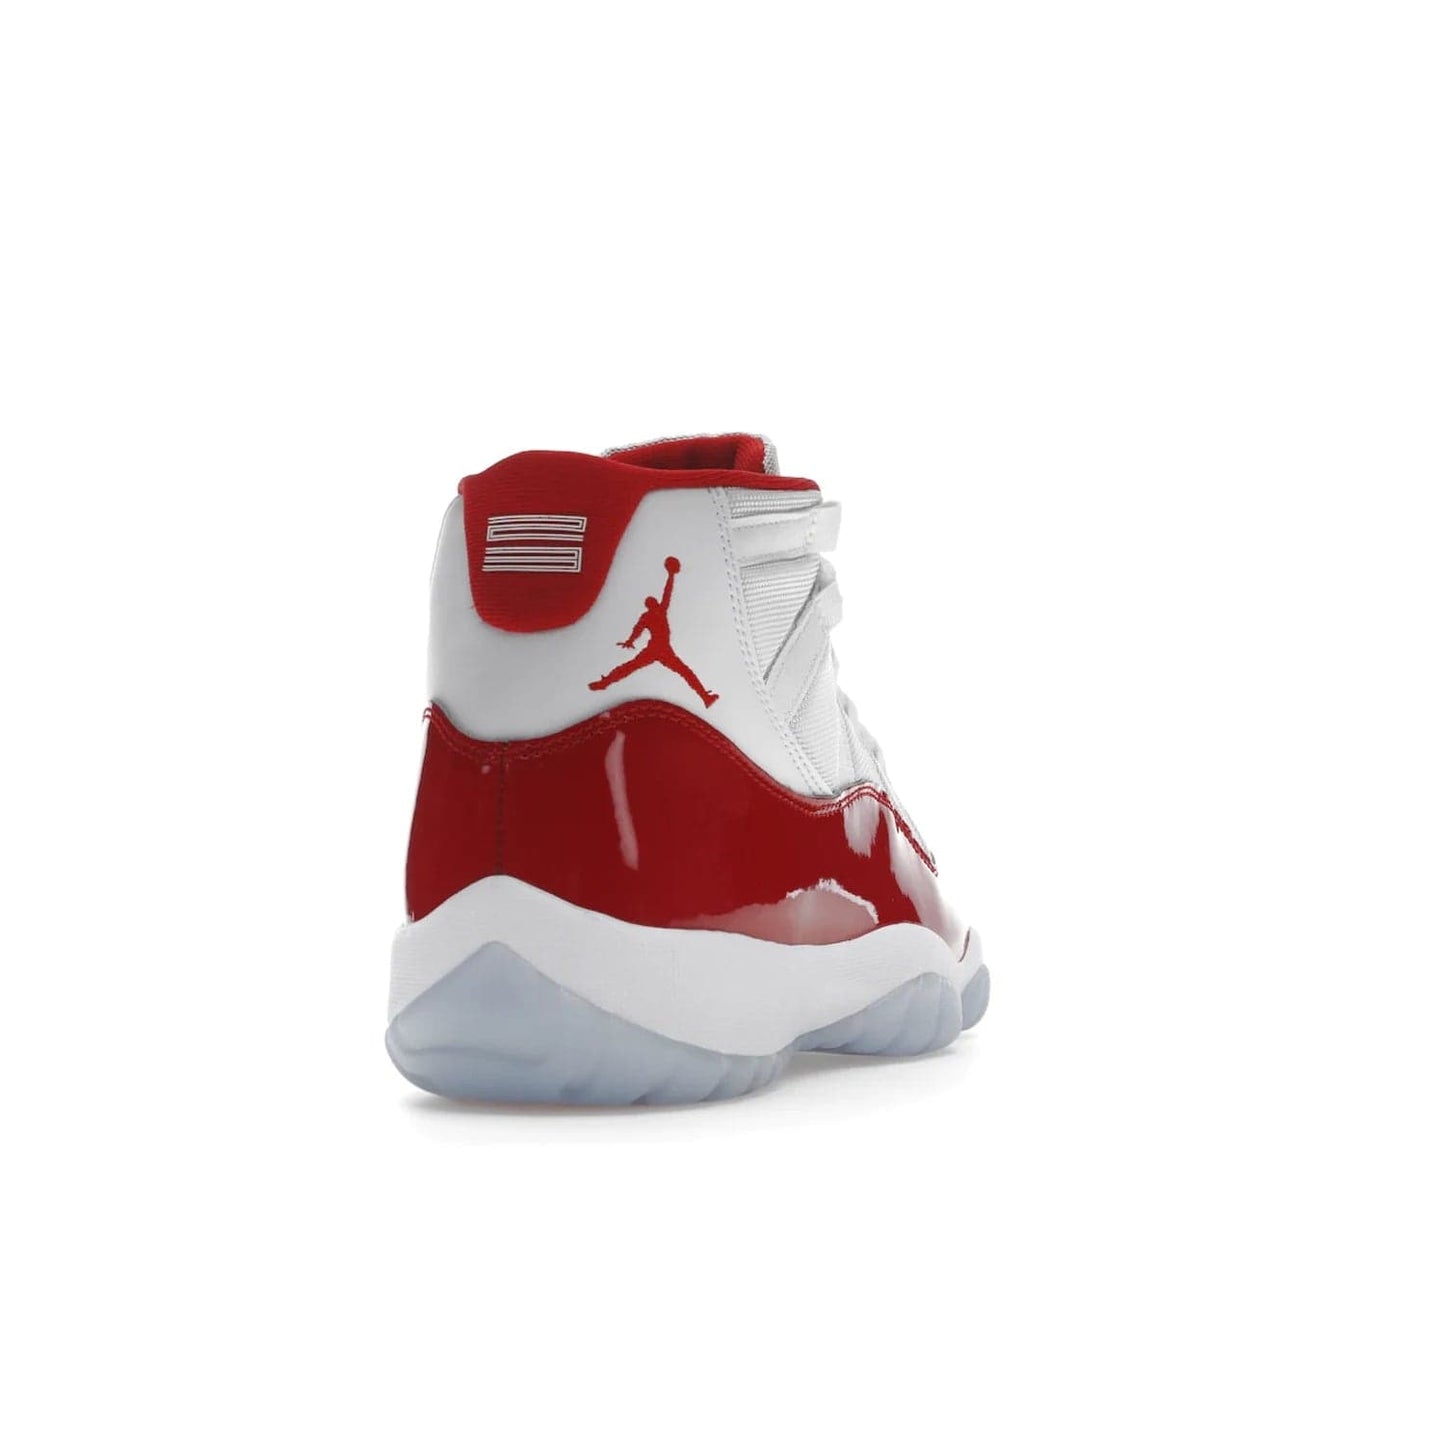 Jordan 11 Retro Cherry (2022) - Image 30 - Only at www.BallersClubKickz.com - The Air Jordan 11 Cherry features classic patent leather with Cherry red accents, icy blue outsole, and debossed 23 on the heel tab. Refresh your sneaker game with this iconic update, available December 10, 2022.